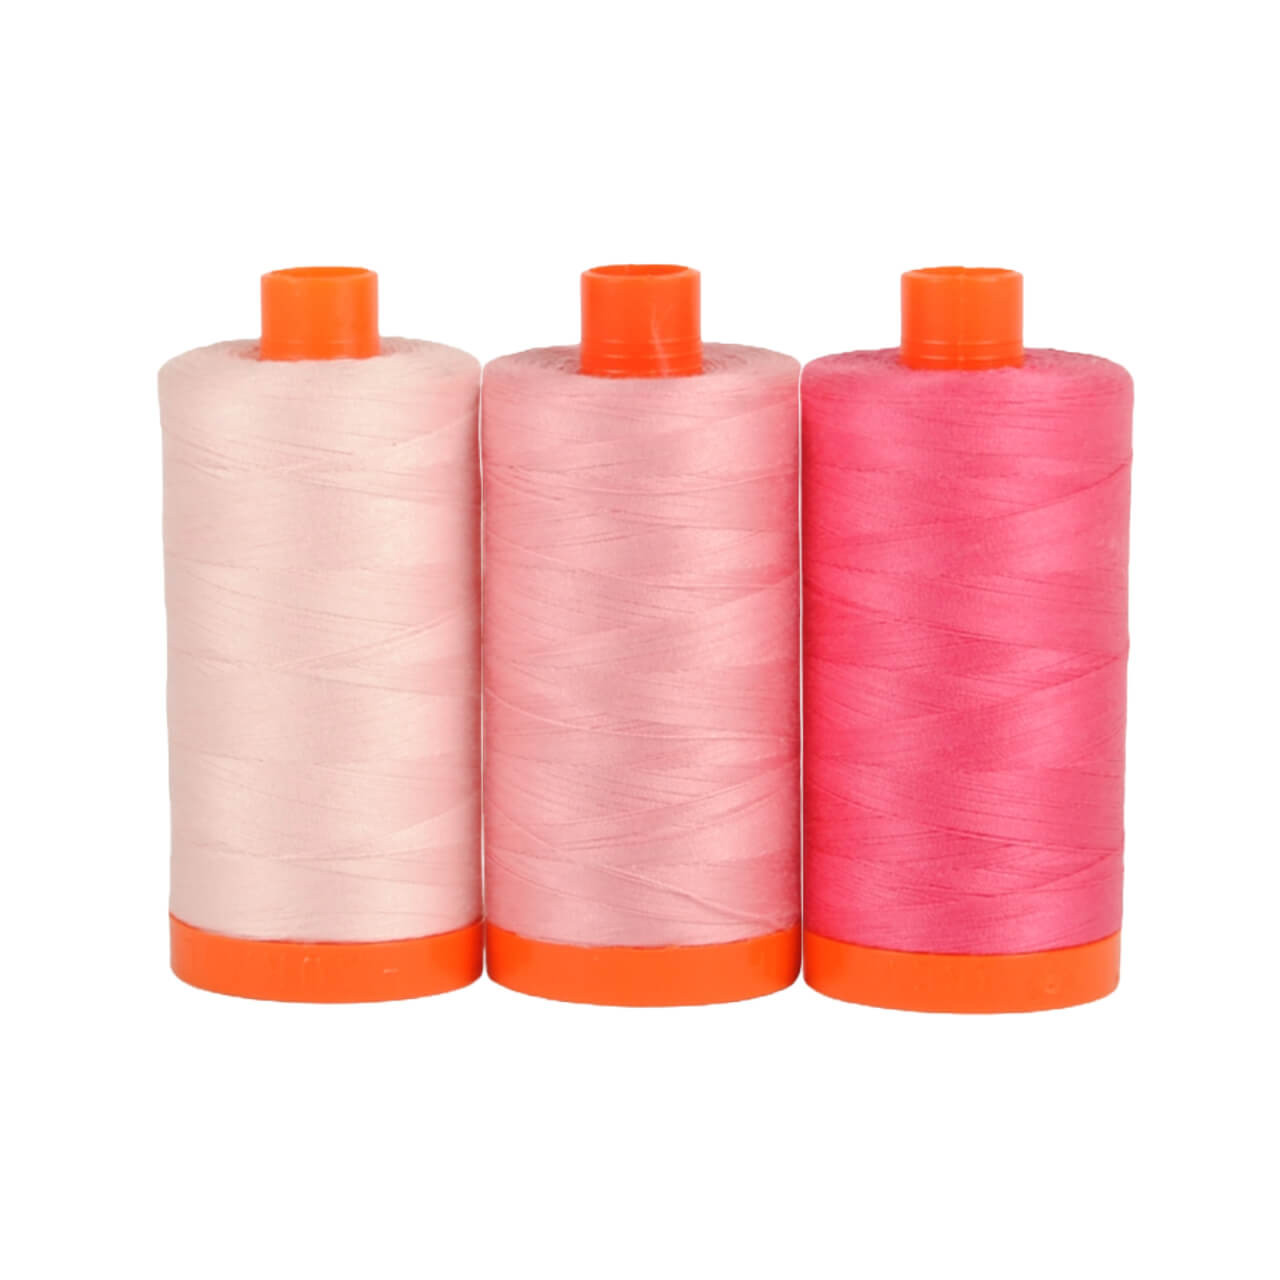 Three spools of Aurifil Sardinia 50wt Egyptian cotton thread in a gradient of pink colors on a white background.